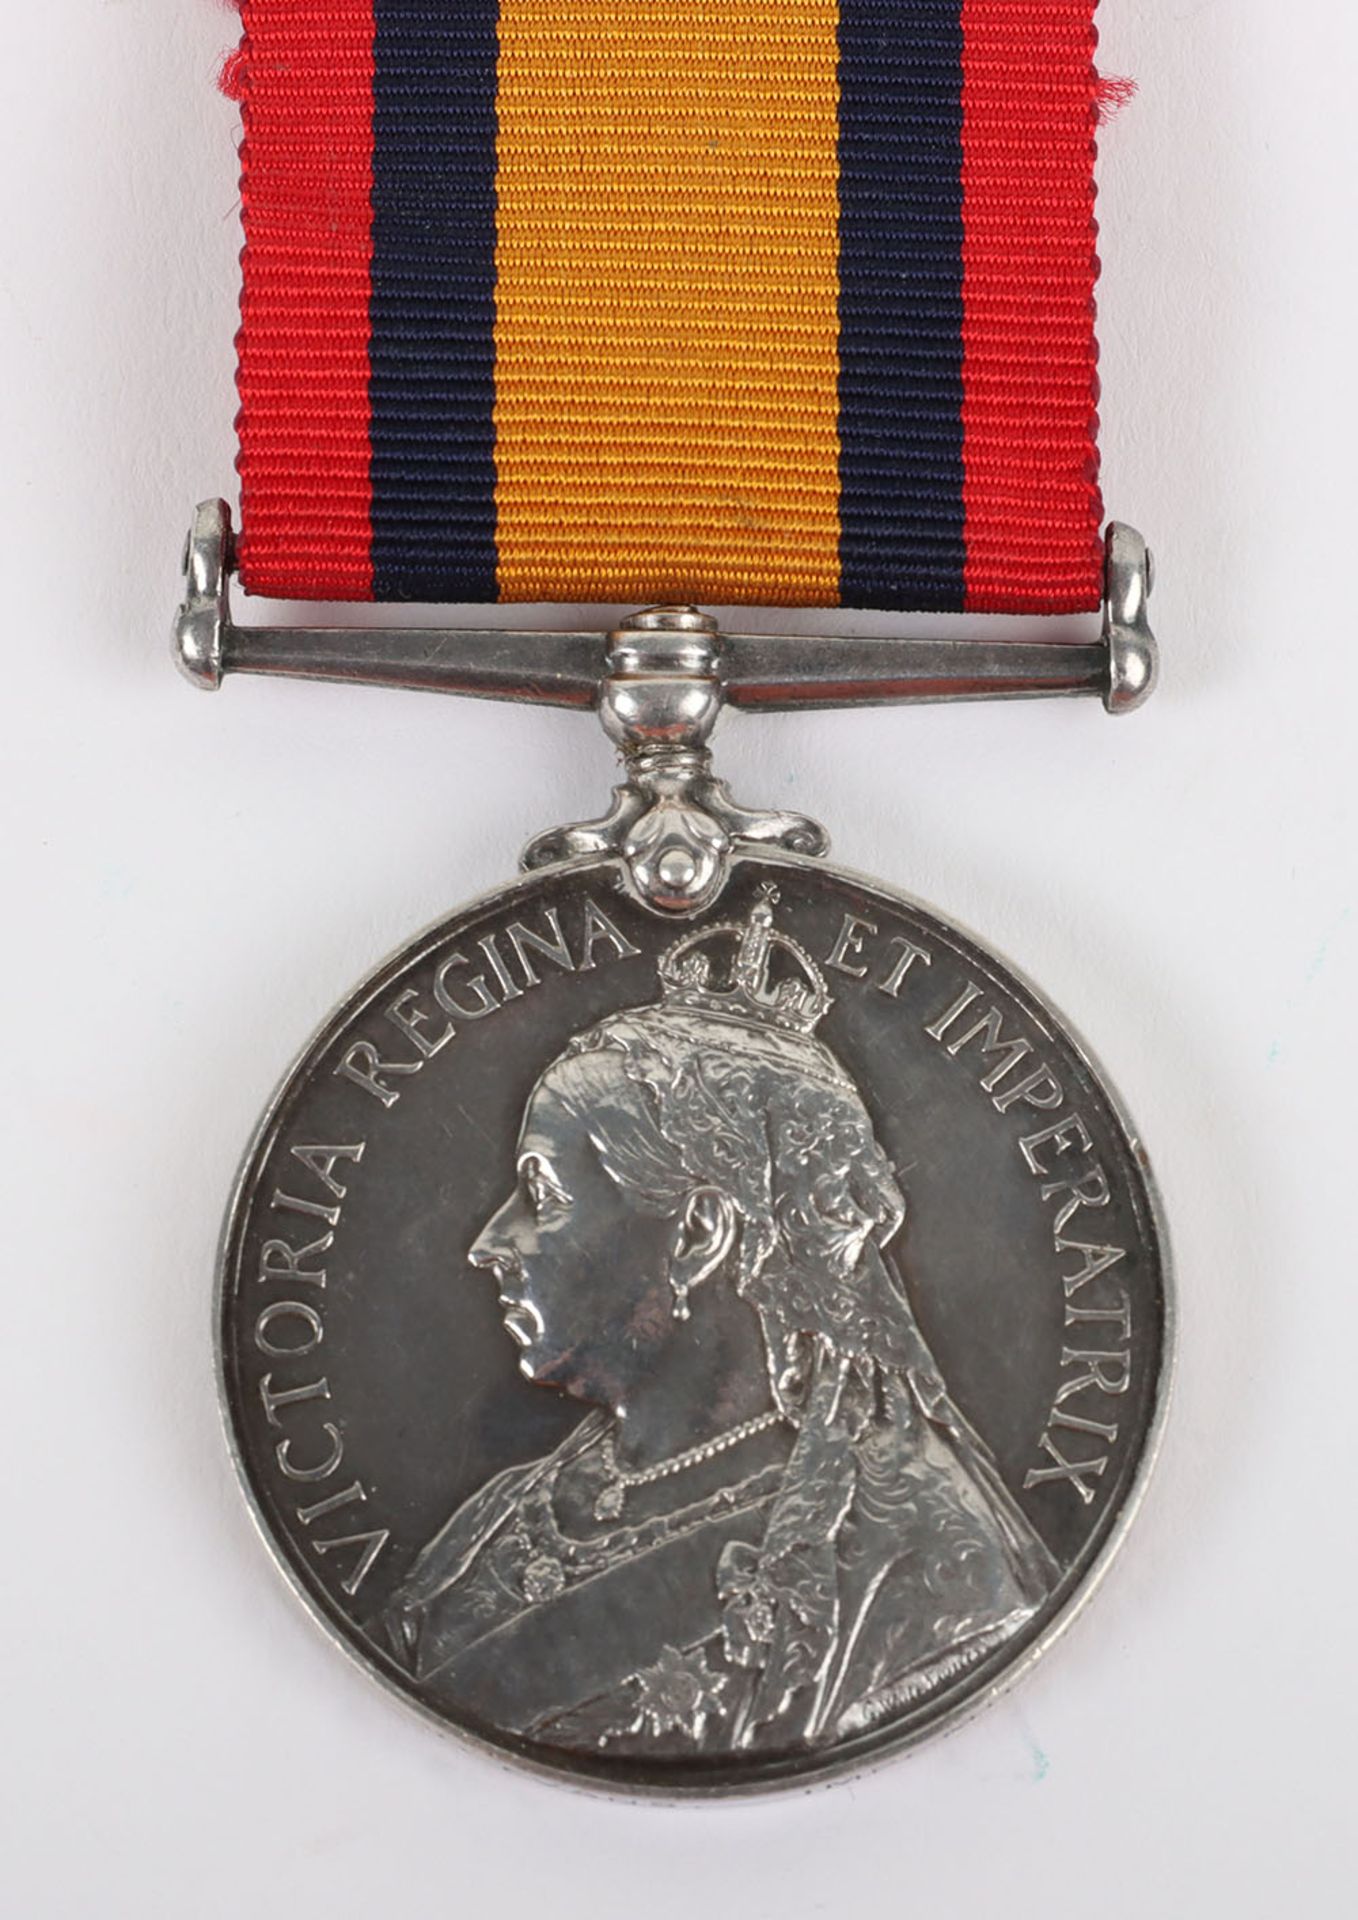 Queens South Africa Medal to a Clerk in the Imperial Military Railway